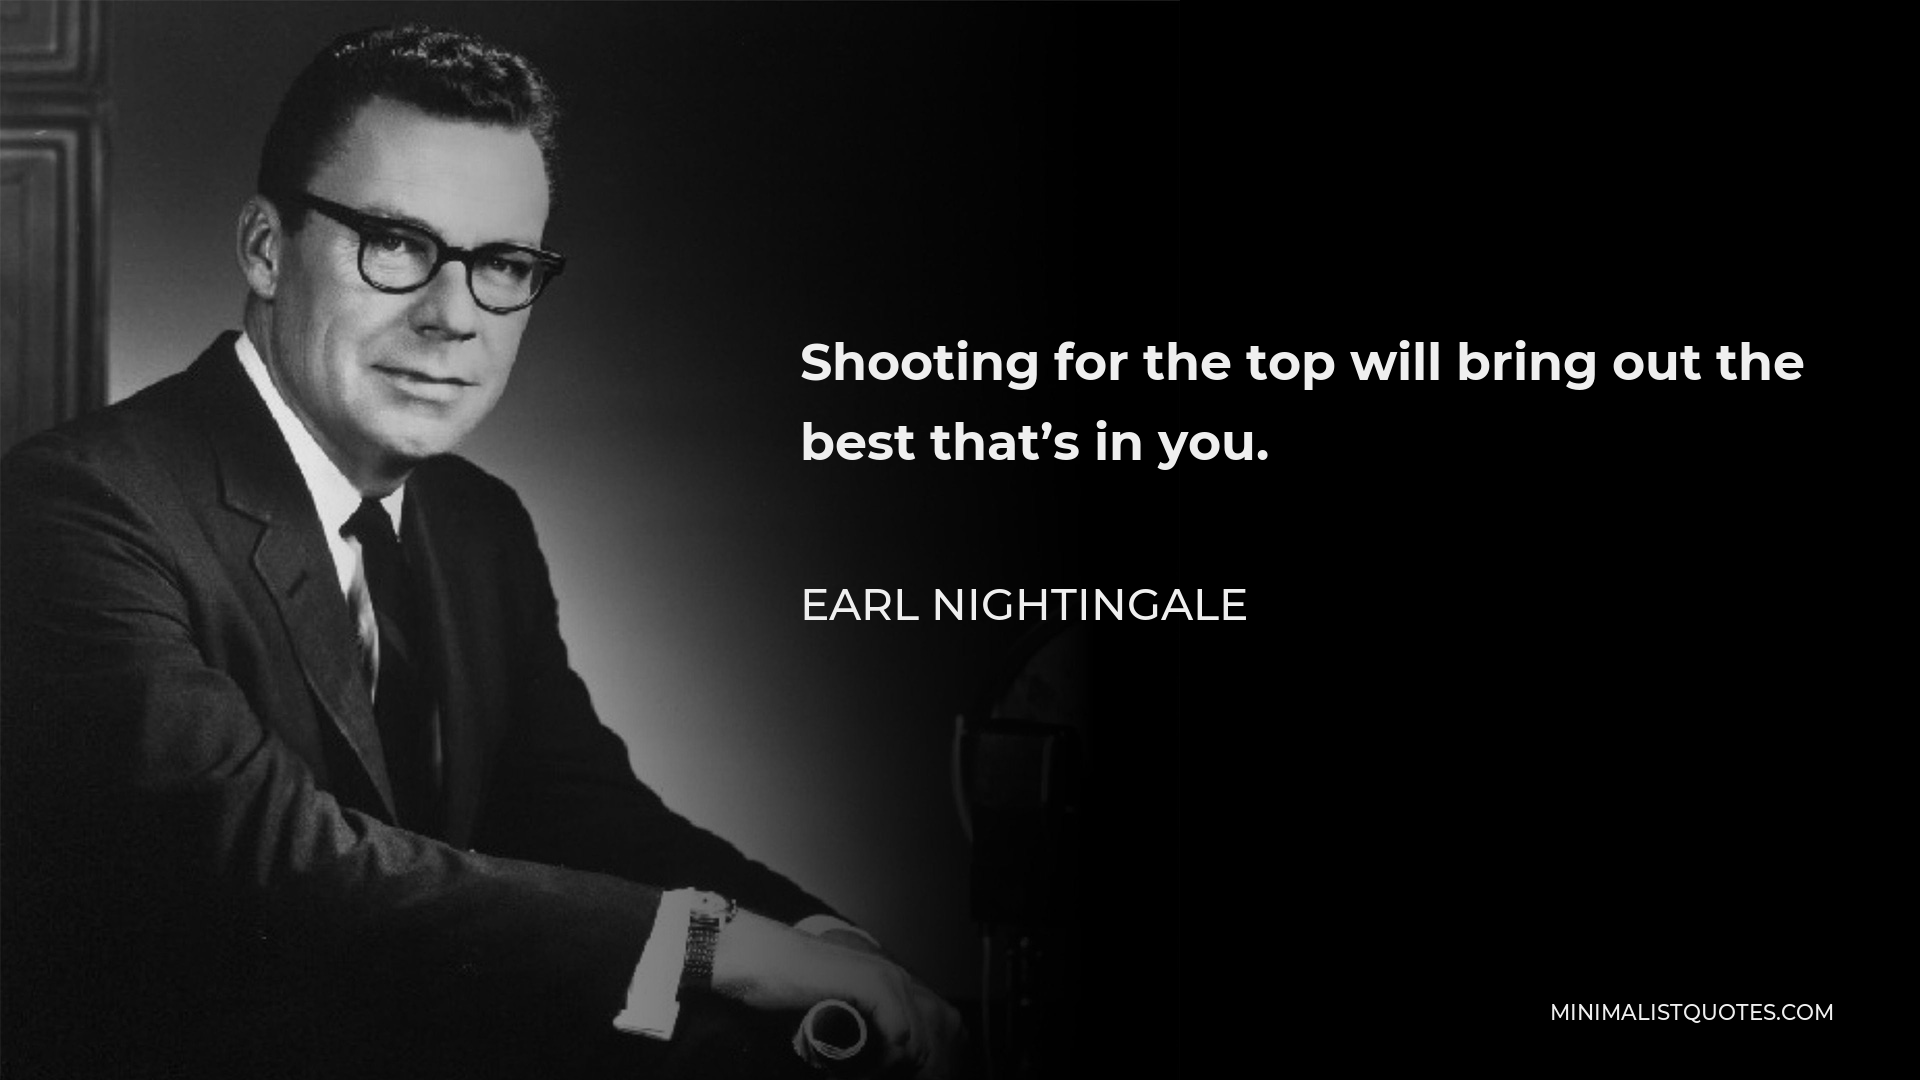 Earl Nightingale Quote - Shooting for the top will bring out the best that’s in you.